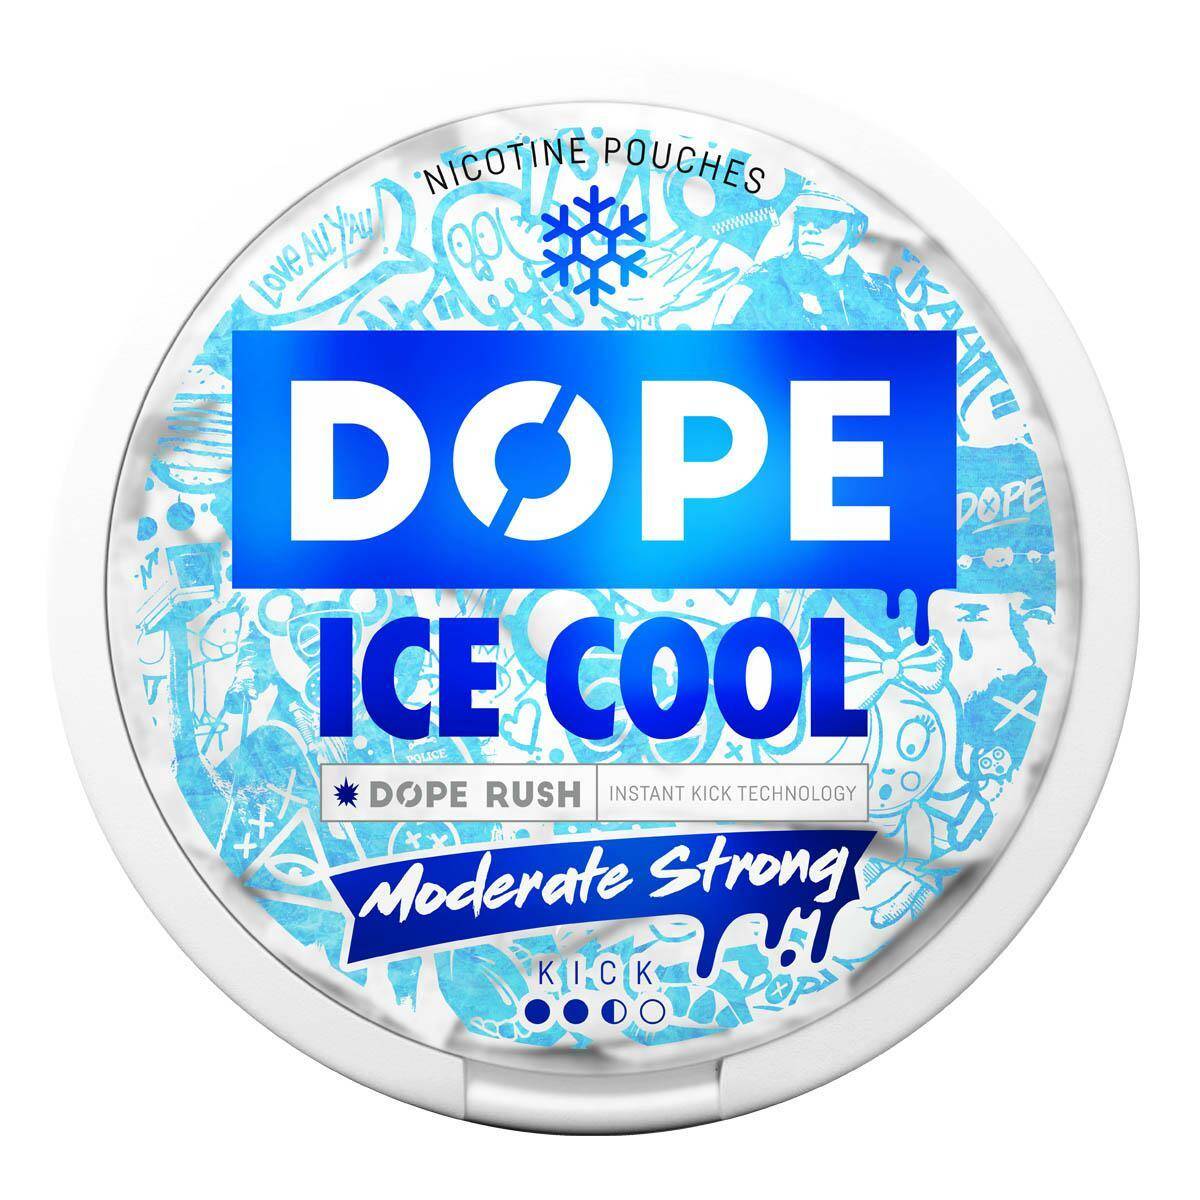 Nicotine Pouches DOPE - Ice Cool 16mg/g